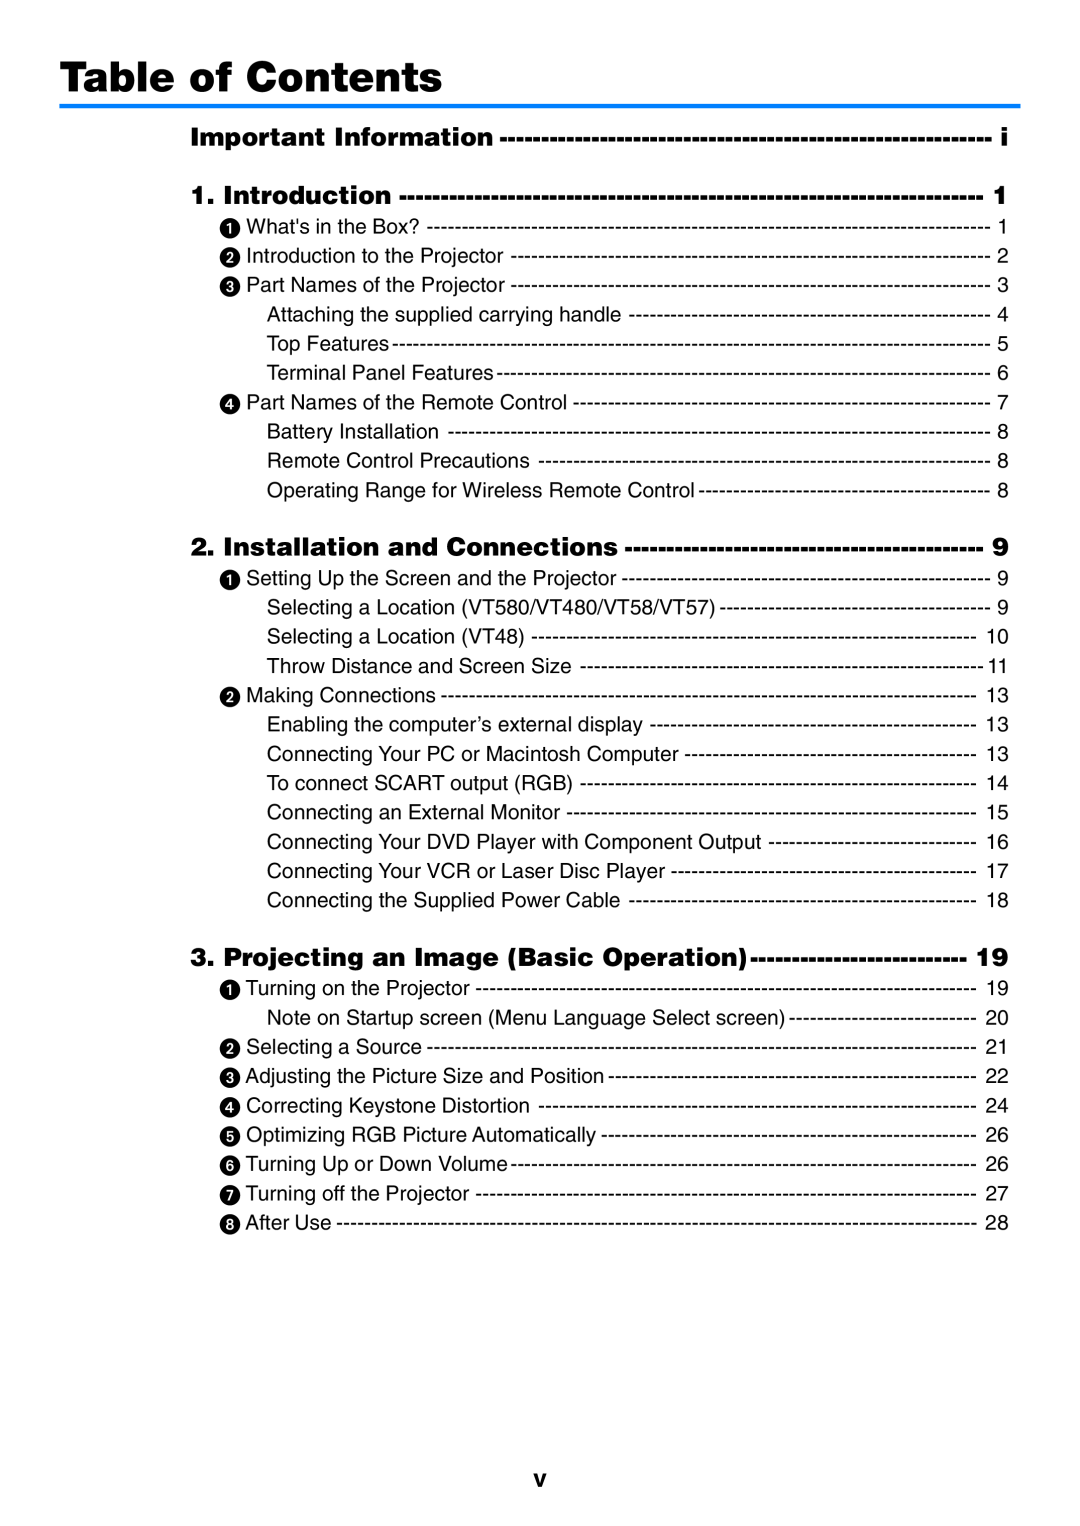 NEC VT57, VT58, VT480 manual Table of Contents, Important Information, Introduction, Installation and Connections 